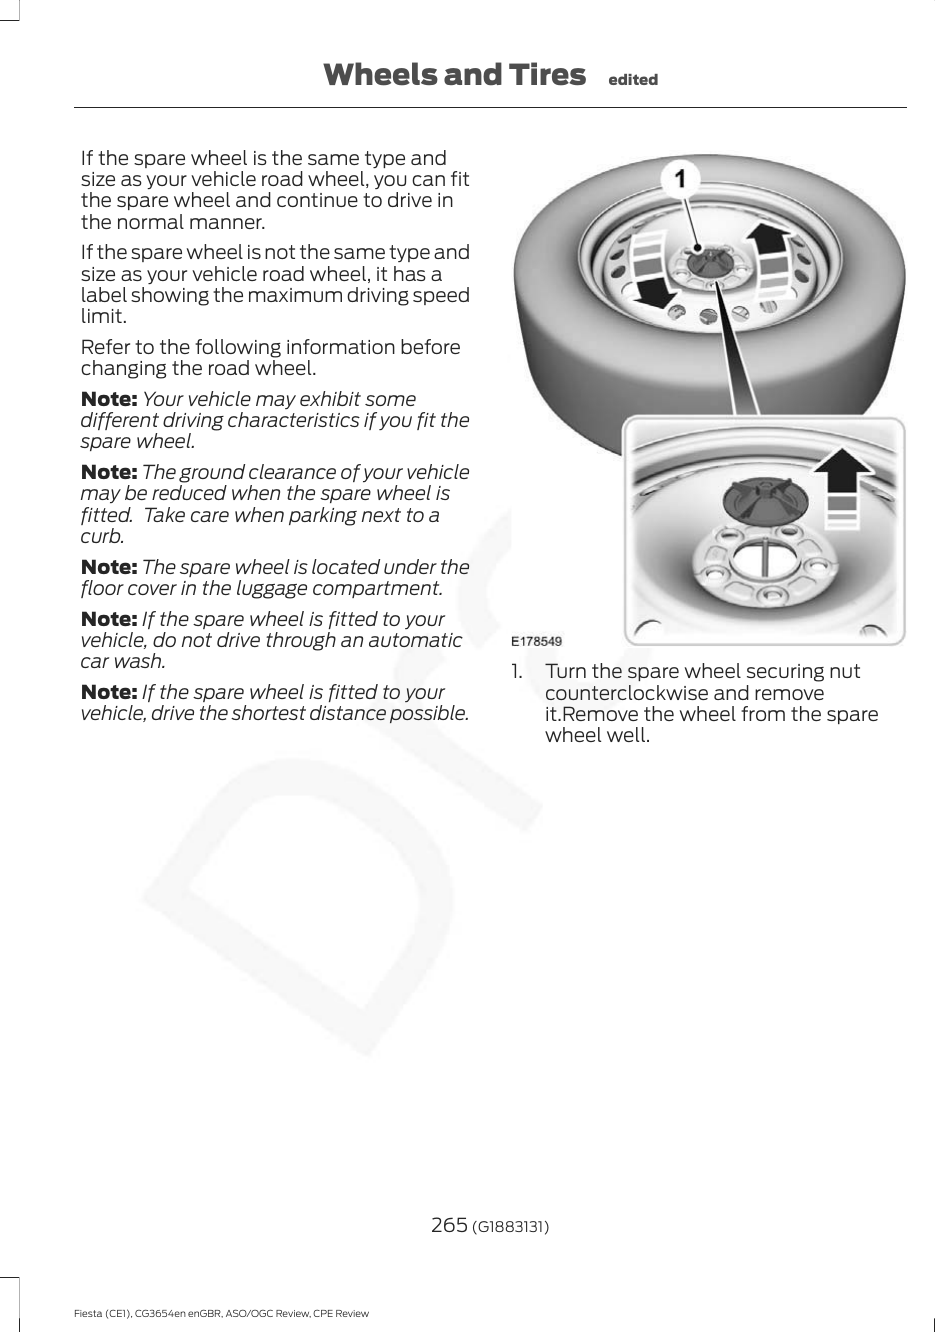 If the spare wheel is the same type andsize as your vehicle road wheel, you can fitthe spare wheel and continue to drive inthe normal manner.If the spare wheel is not the same type andsize as your vehicle road wheel, it has alabel showing the maximum driving speedlimit.Refer to the following information beforechanging the road wheel.Note: Your vehicle may exhibit somedifferent driving characteristics if you fit thespare wheel.Note: The ground clearance of your vehiclemay be reduced when the spare wheel isfitted.  Take care when parking next to acurb.Note: The spare wheel is located under thefloor cover in the luggage compartment.Note: If the spare wheel is fitted to yourvehicle, do not drive through an automaticcar wash.Note: If the spare wheel is fitted to yourvehicle, drive the shortest distance possible.1. Turn the spare wheel securing nutcounterclockwise and removeit.Remove the wheel from the sparewheel well.265 (G1883131)Fiesta (CE1), CG3654en enGBR, ASO/OGC Review, CPE ReviewWheels and Tires edited